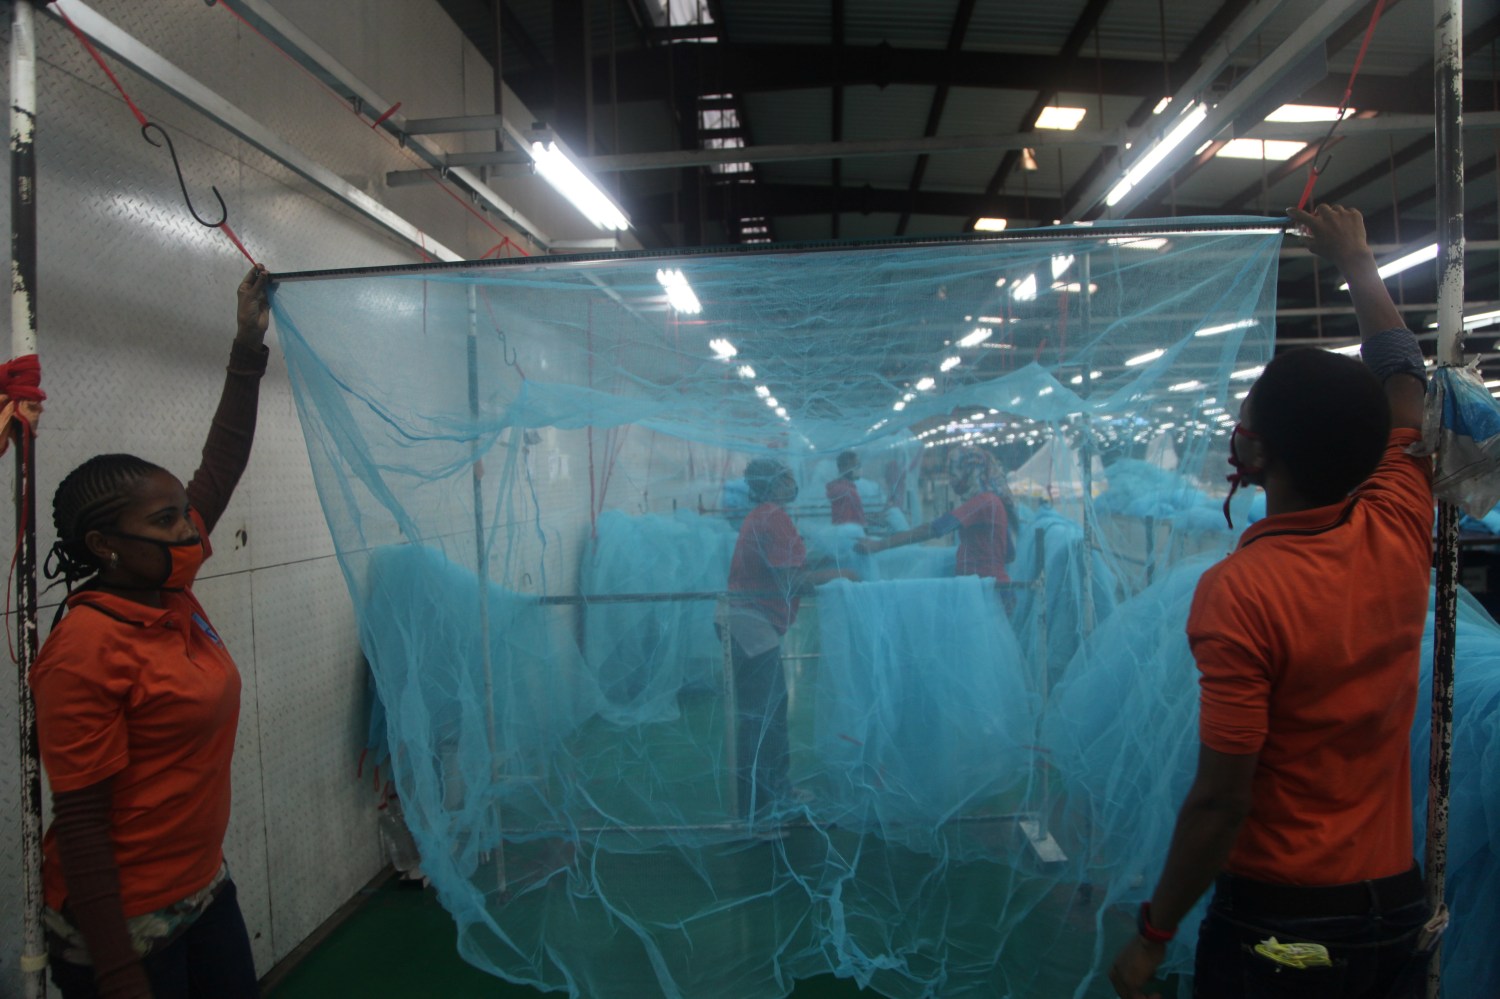 Workers look for abnormal holes in mosquito netting at the A to Z Textile Mills factory producing insecticide-treated bednets in Arusha, Tanzania, May 10, 2016. REUTERS/Katy Migiro